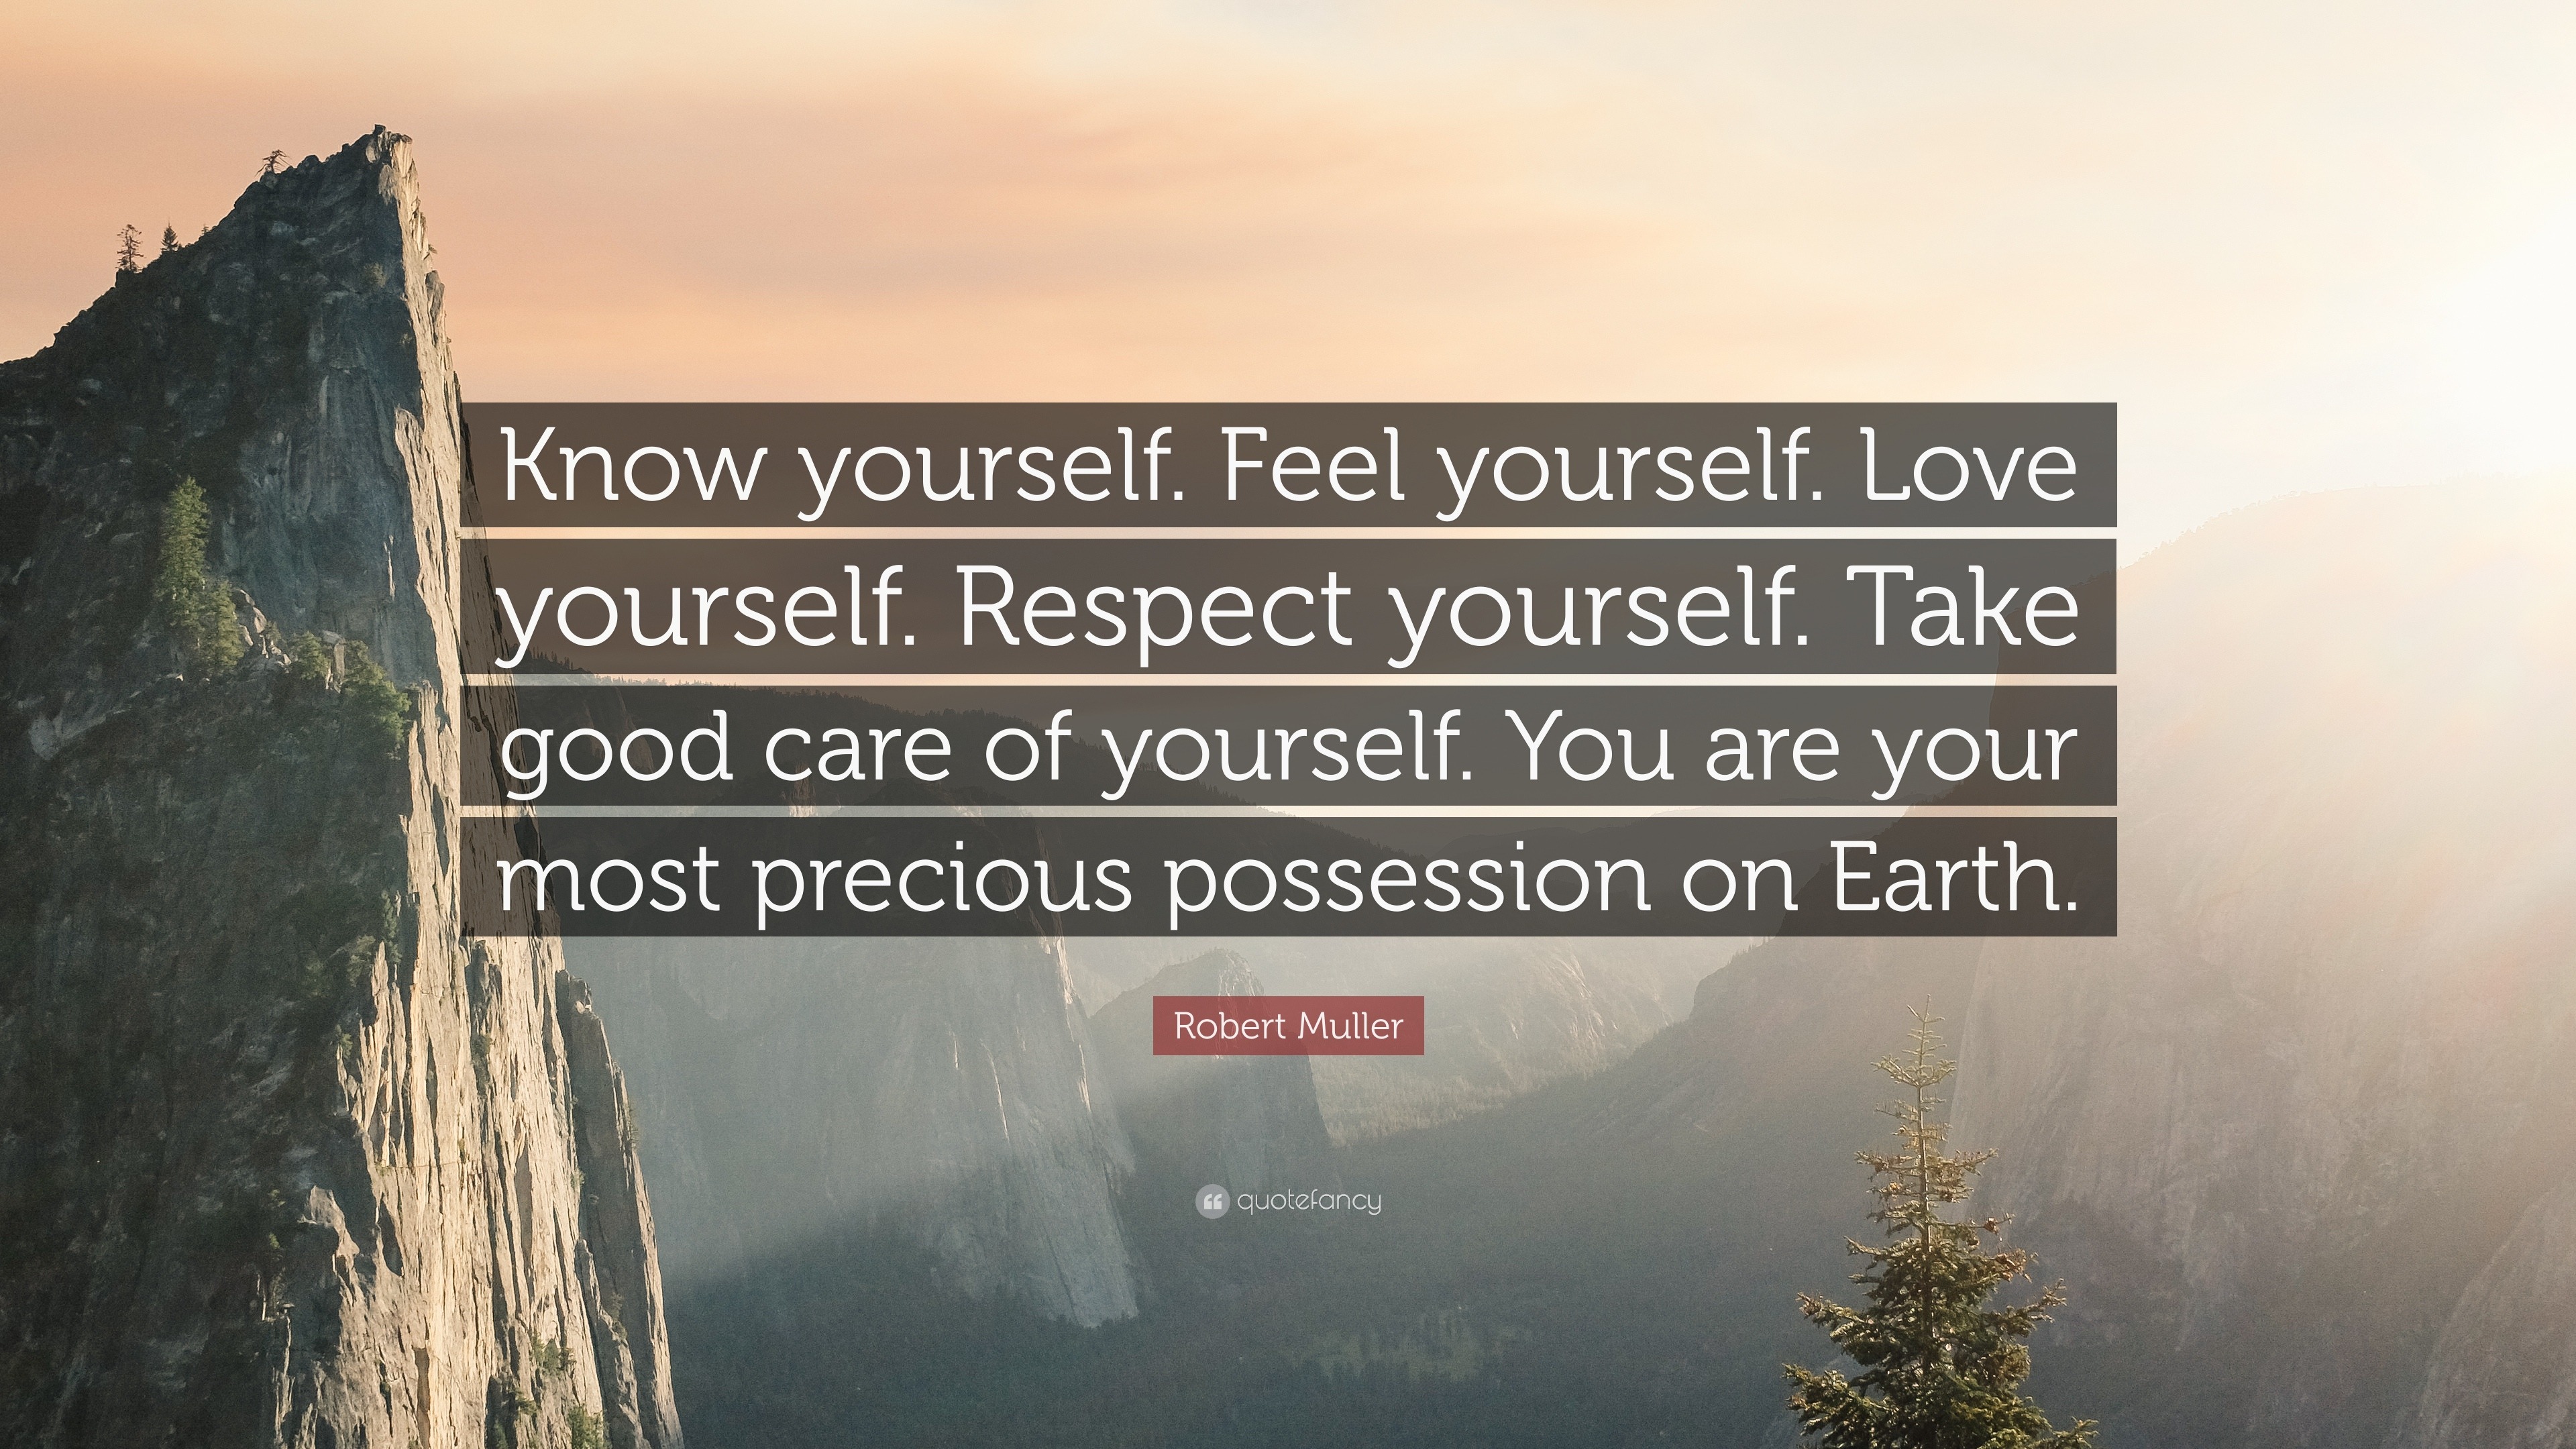 Robert Muller Quote “Know yourself Feel yourself Love yourself Respect yourself